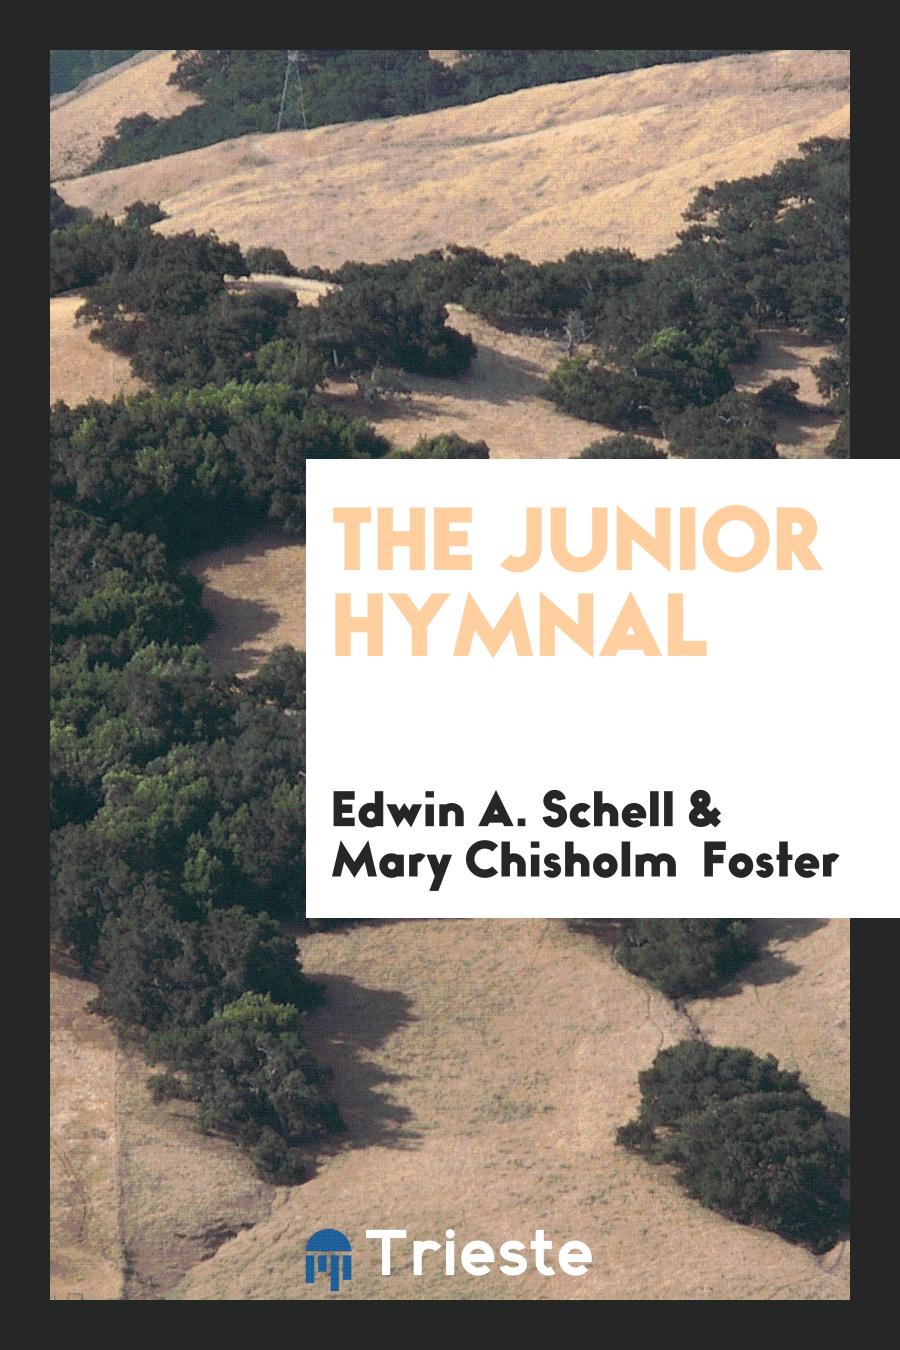 The Junior Hymnal